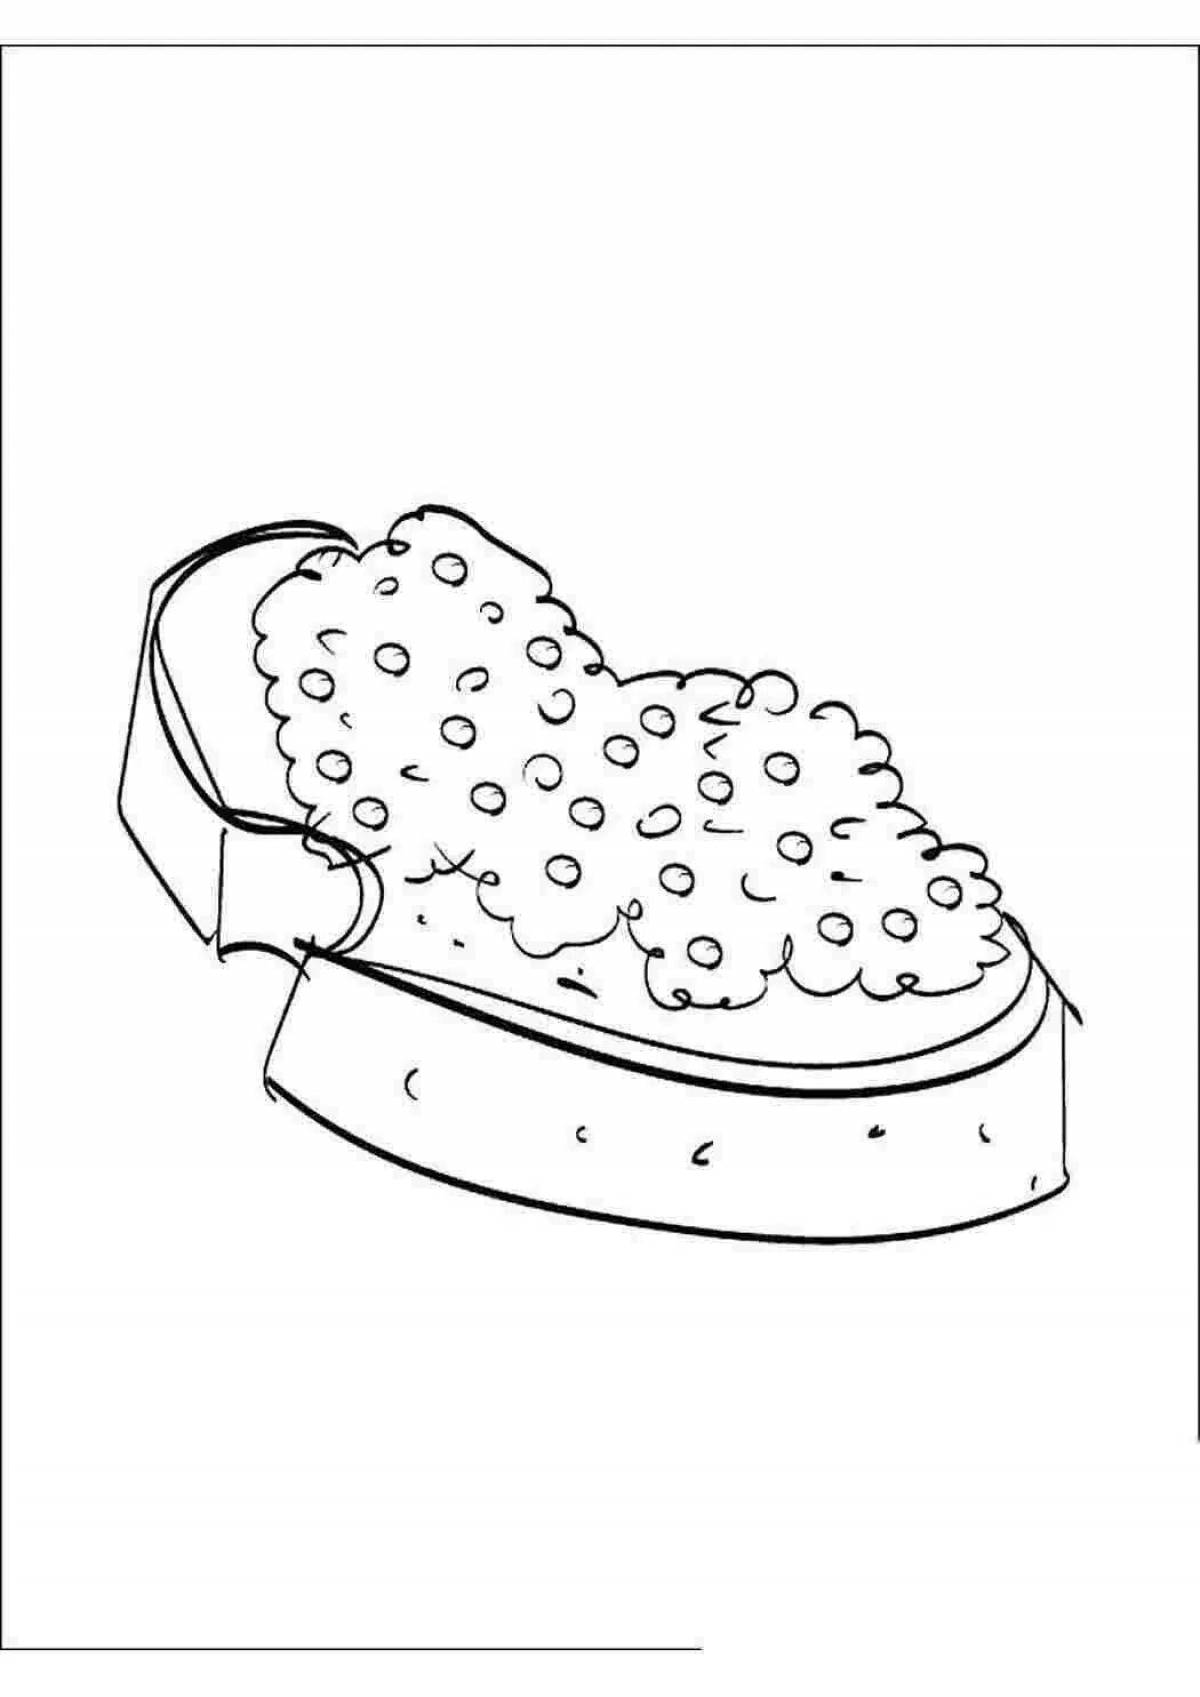 Coloring page tantalizing sausage sandwich